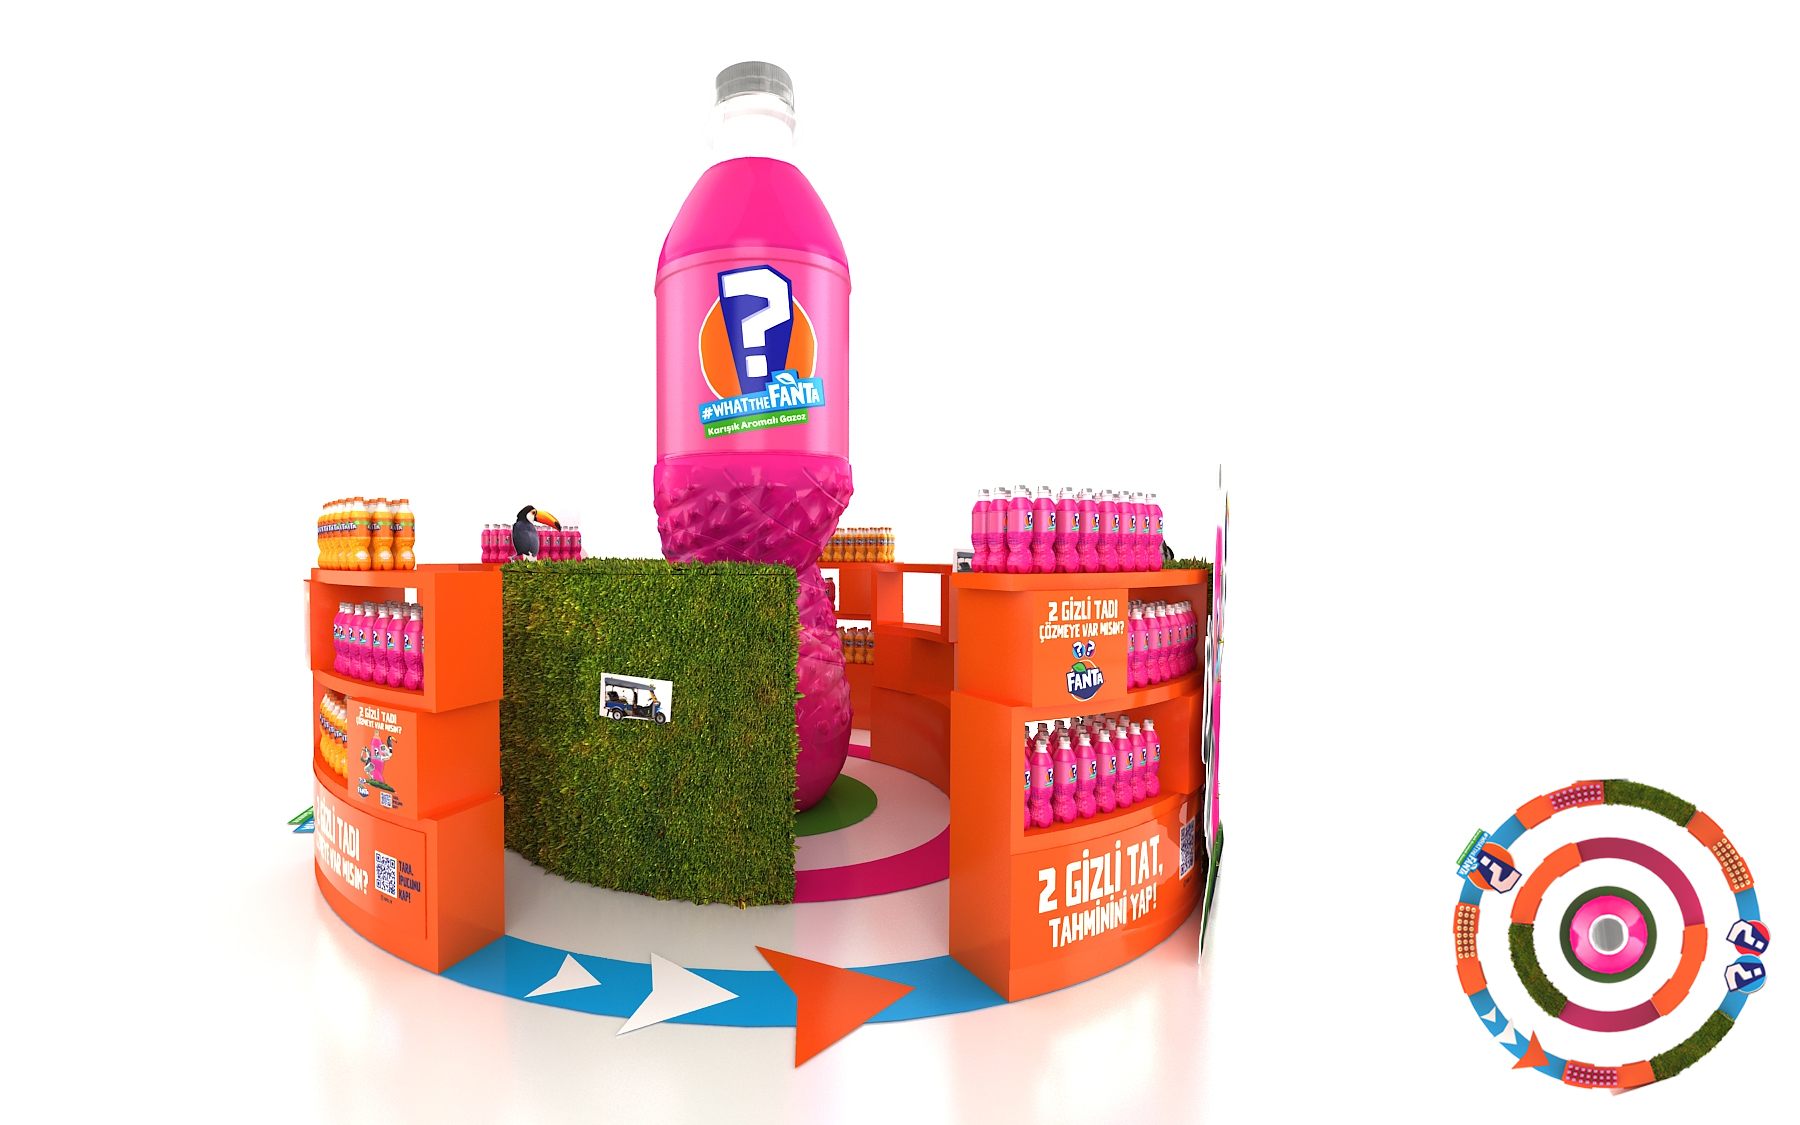 What the Fanta Activity Stand